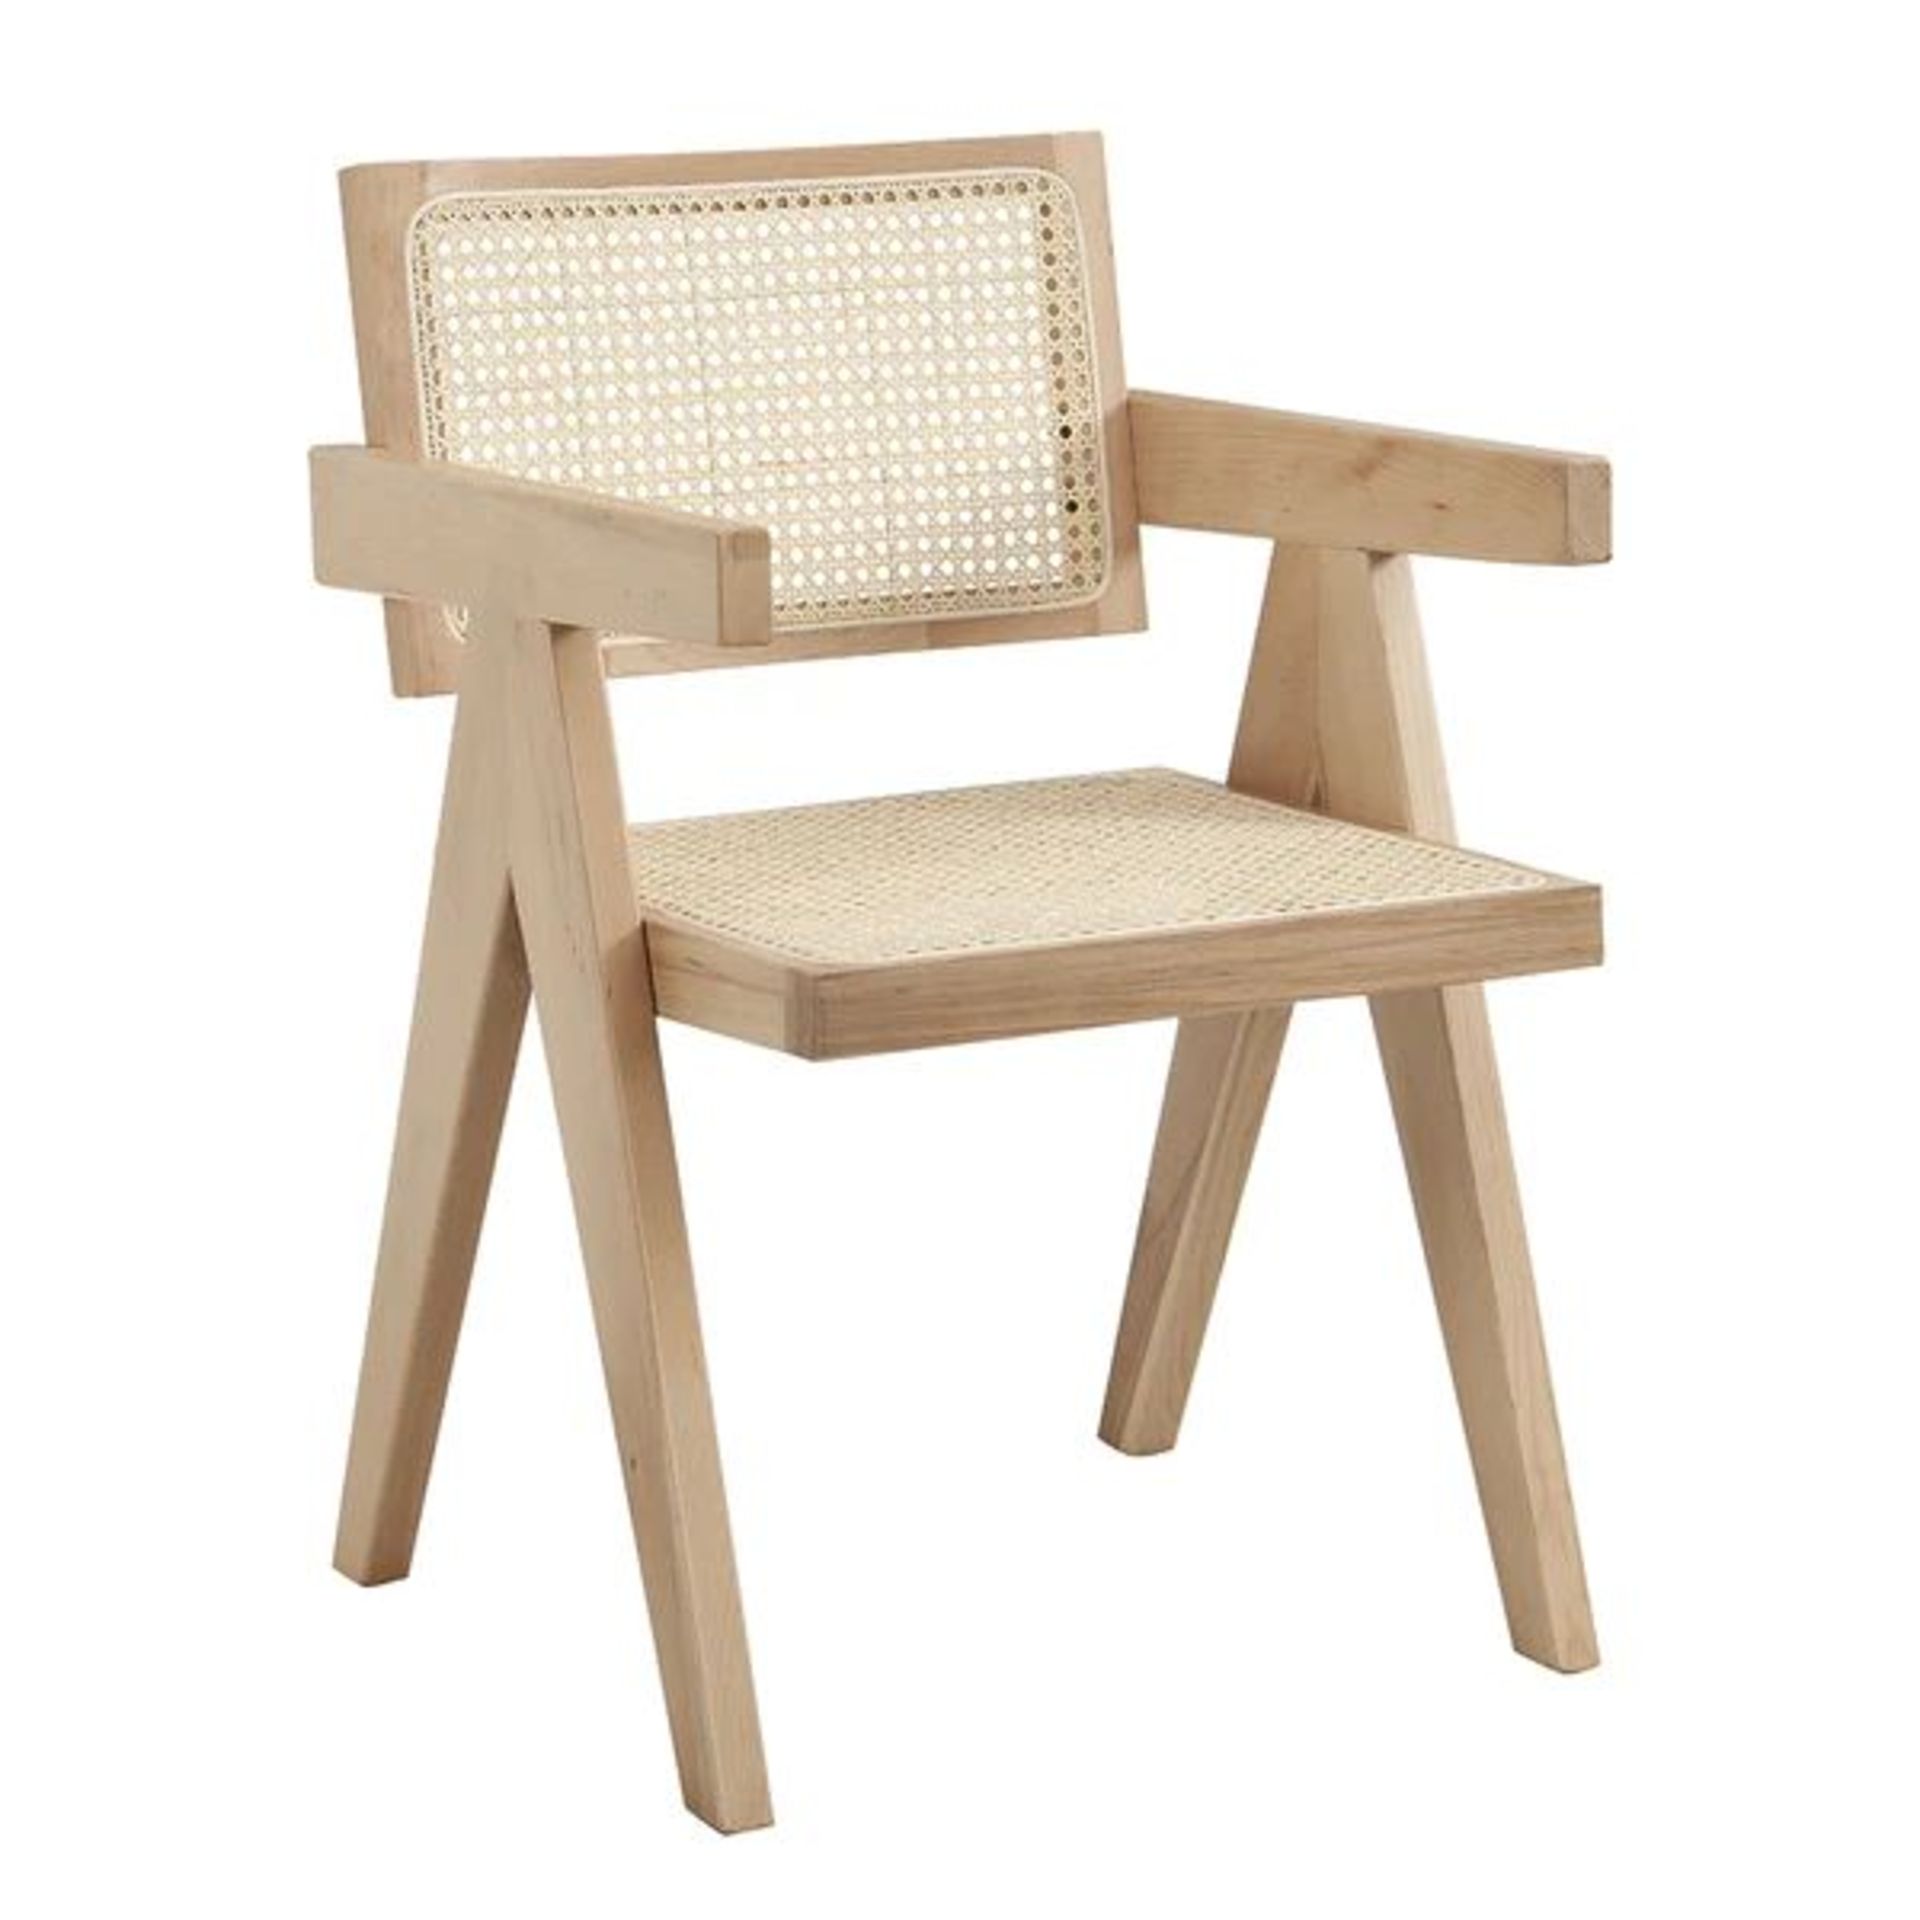 Jeanne Natural Colour Cane Rattan Solid Beech Wood Dining Chair. -ER31. RRP £209.99. The cane rattan - Image 2 of 2